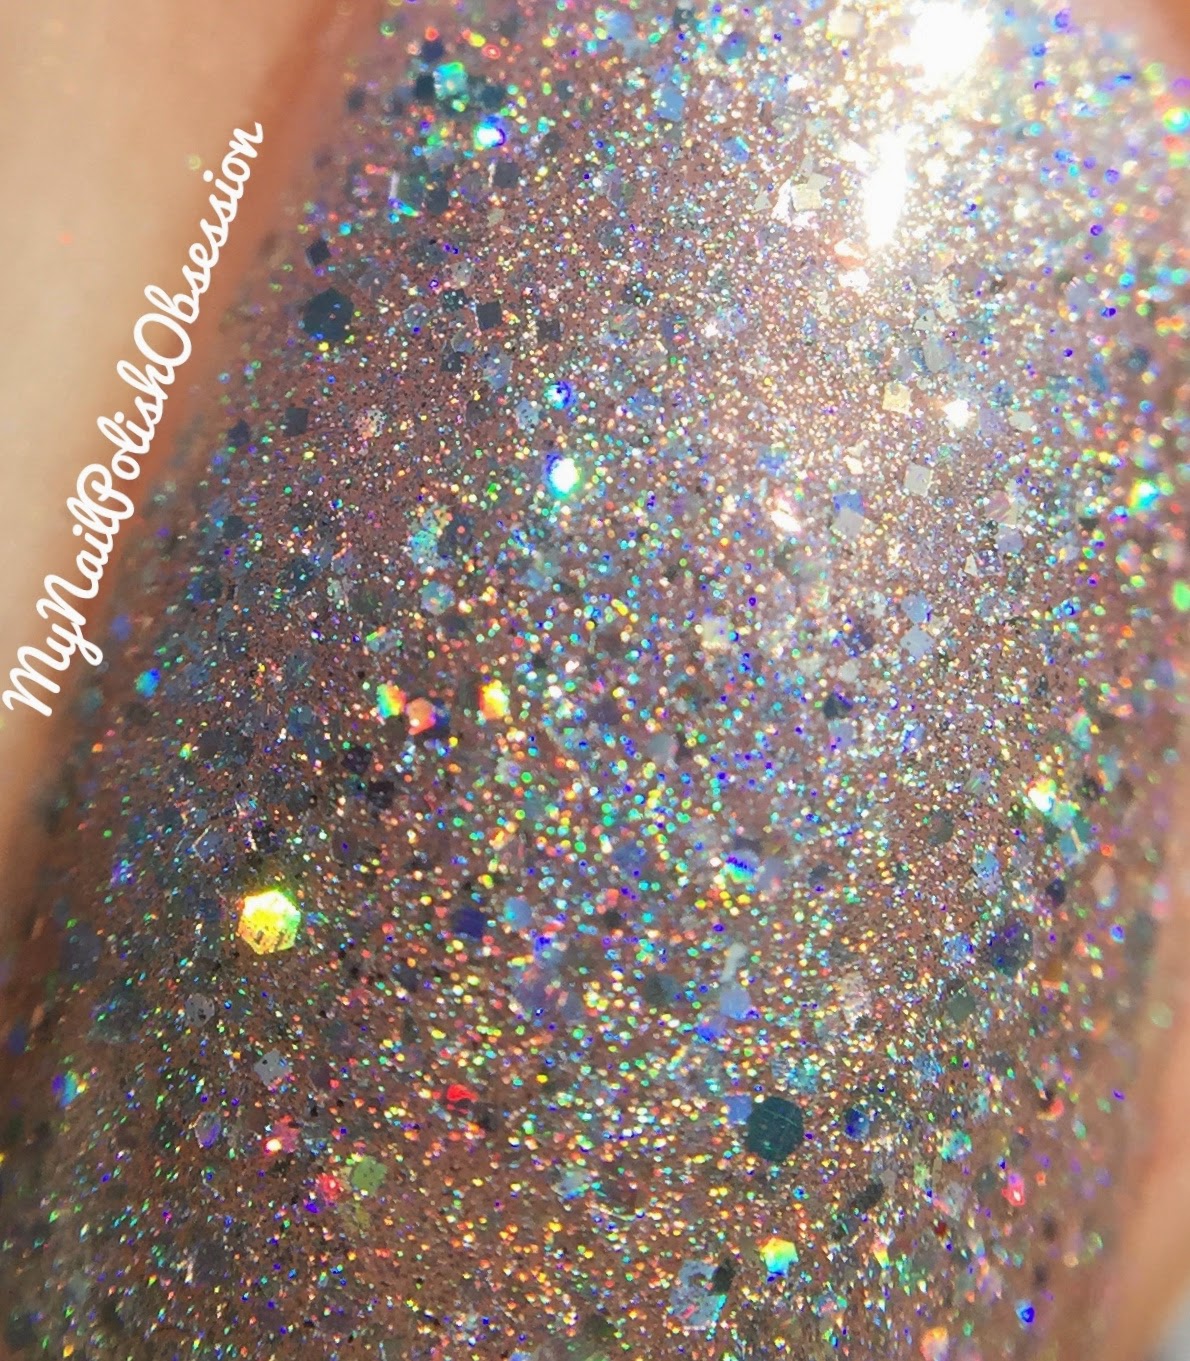 Literary Lacquers Mirror of Galadriel